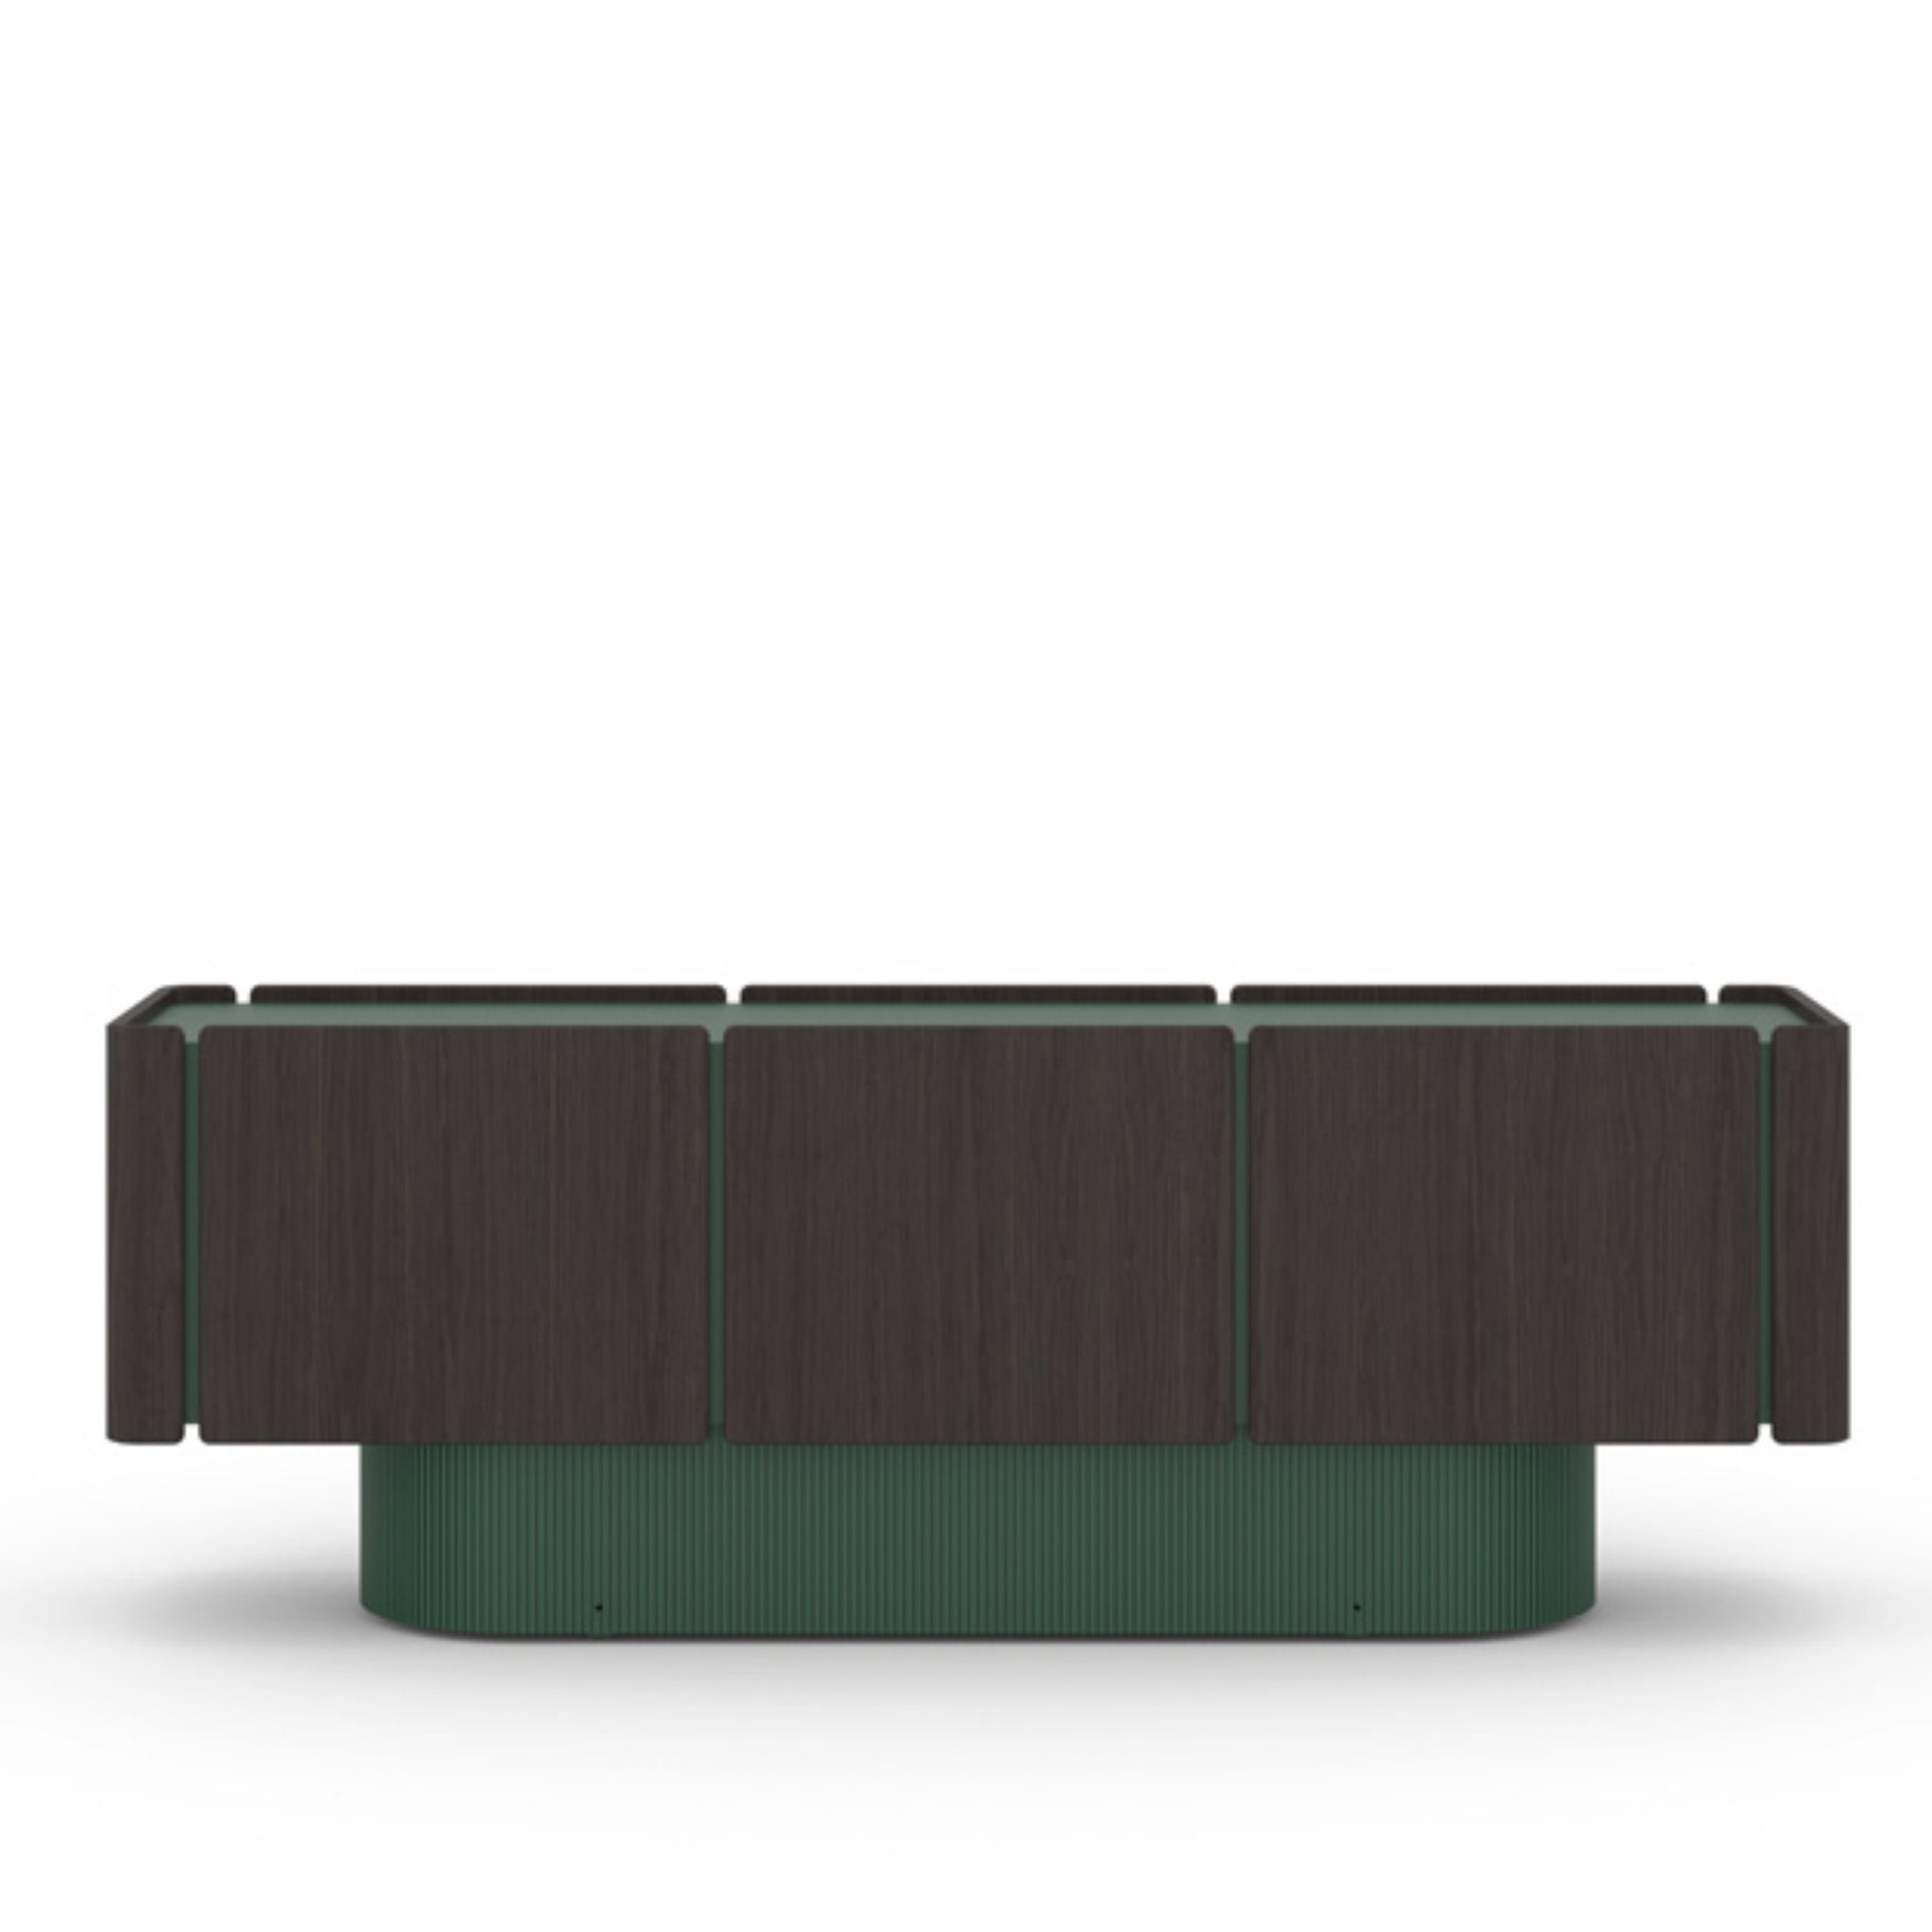 Dune Sideboard by Mónica Armani for Punt